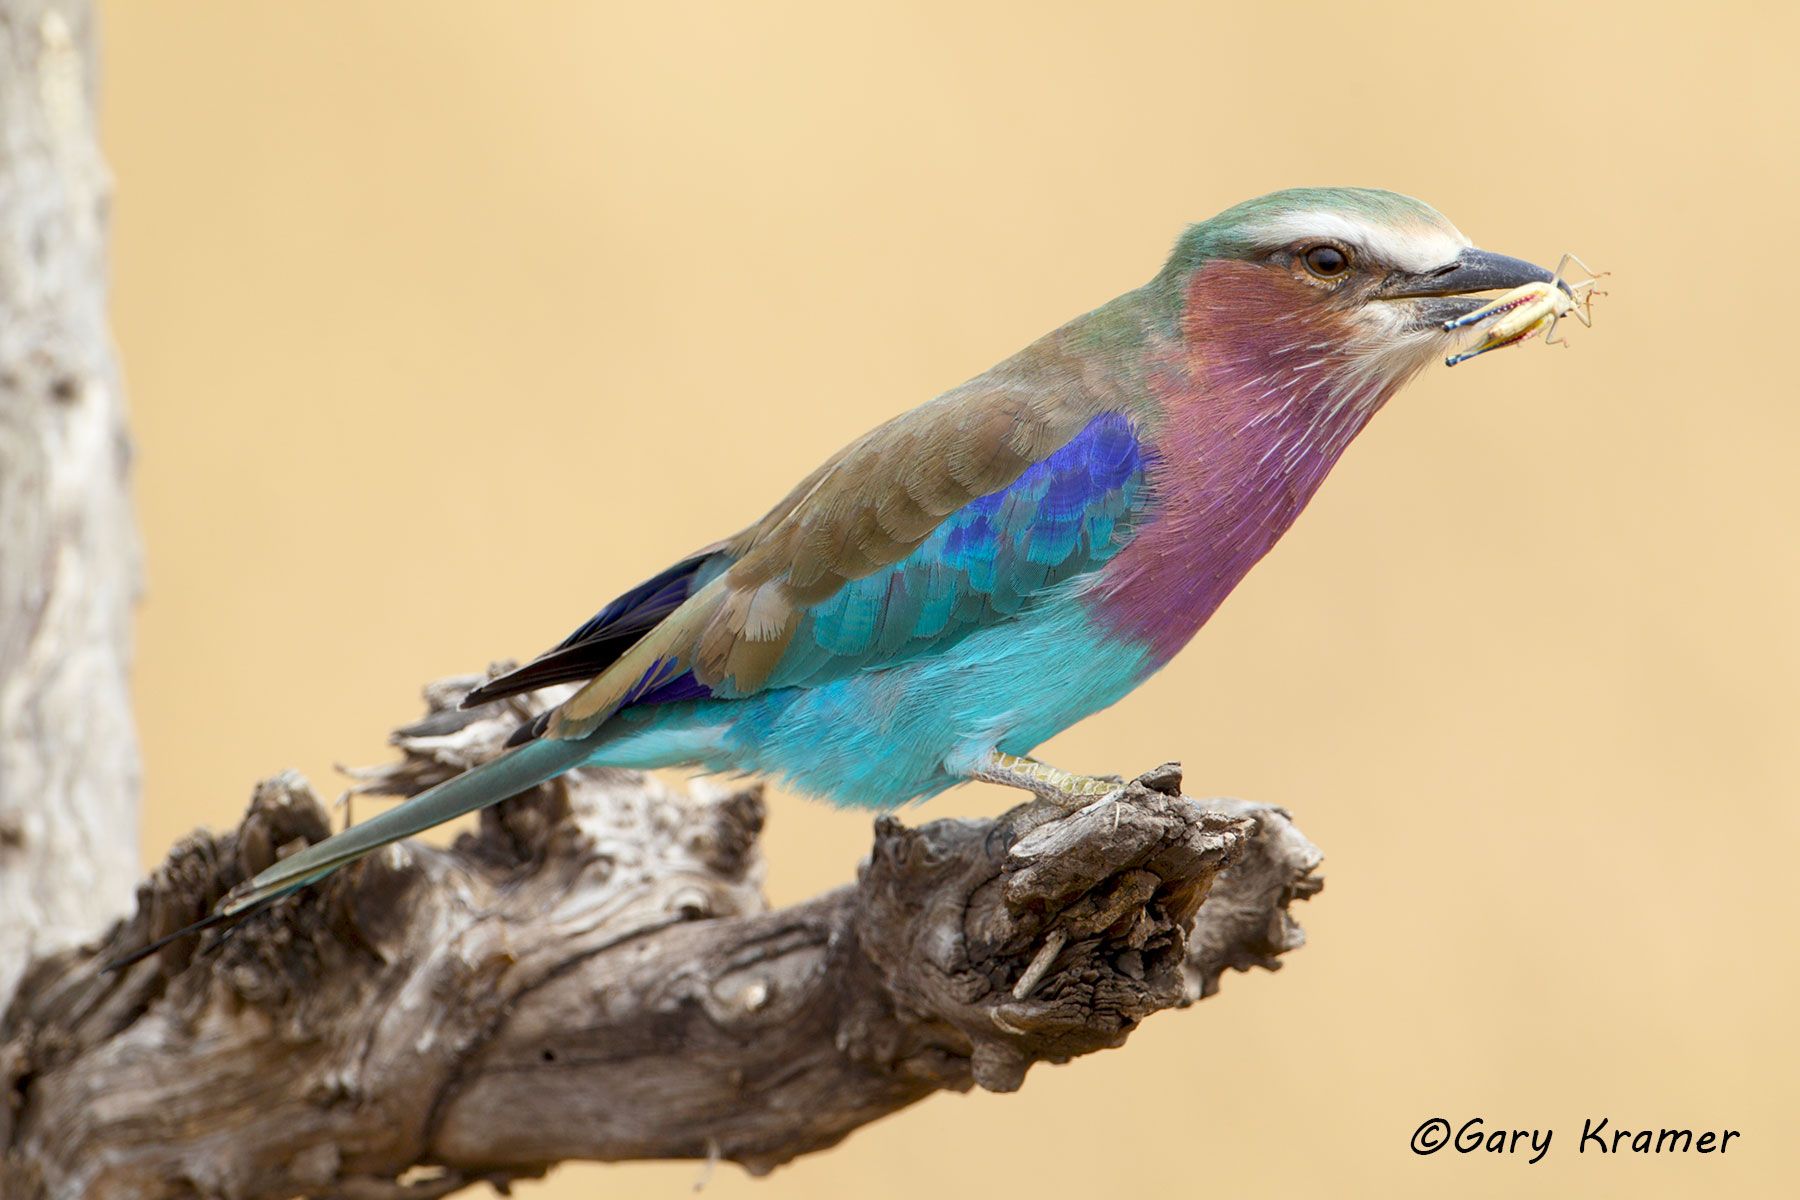 Lilac-breasted roller (Coracias caudata) - ABRl#125d